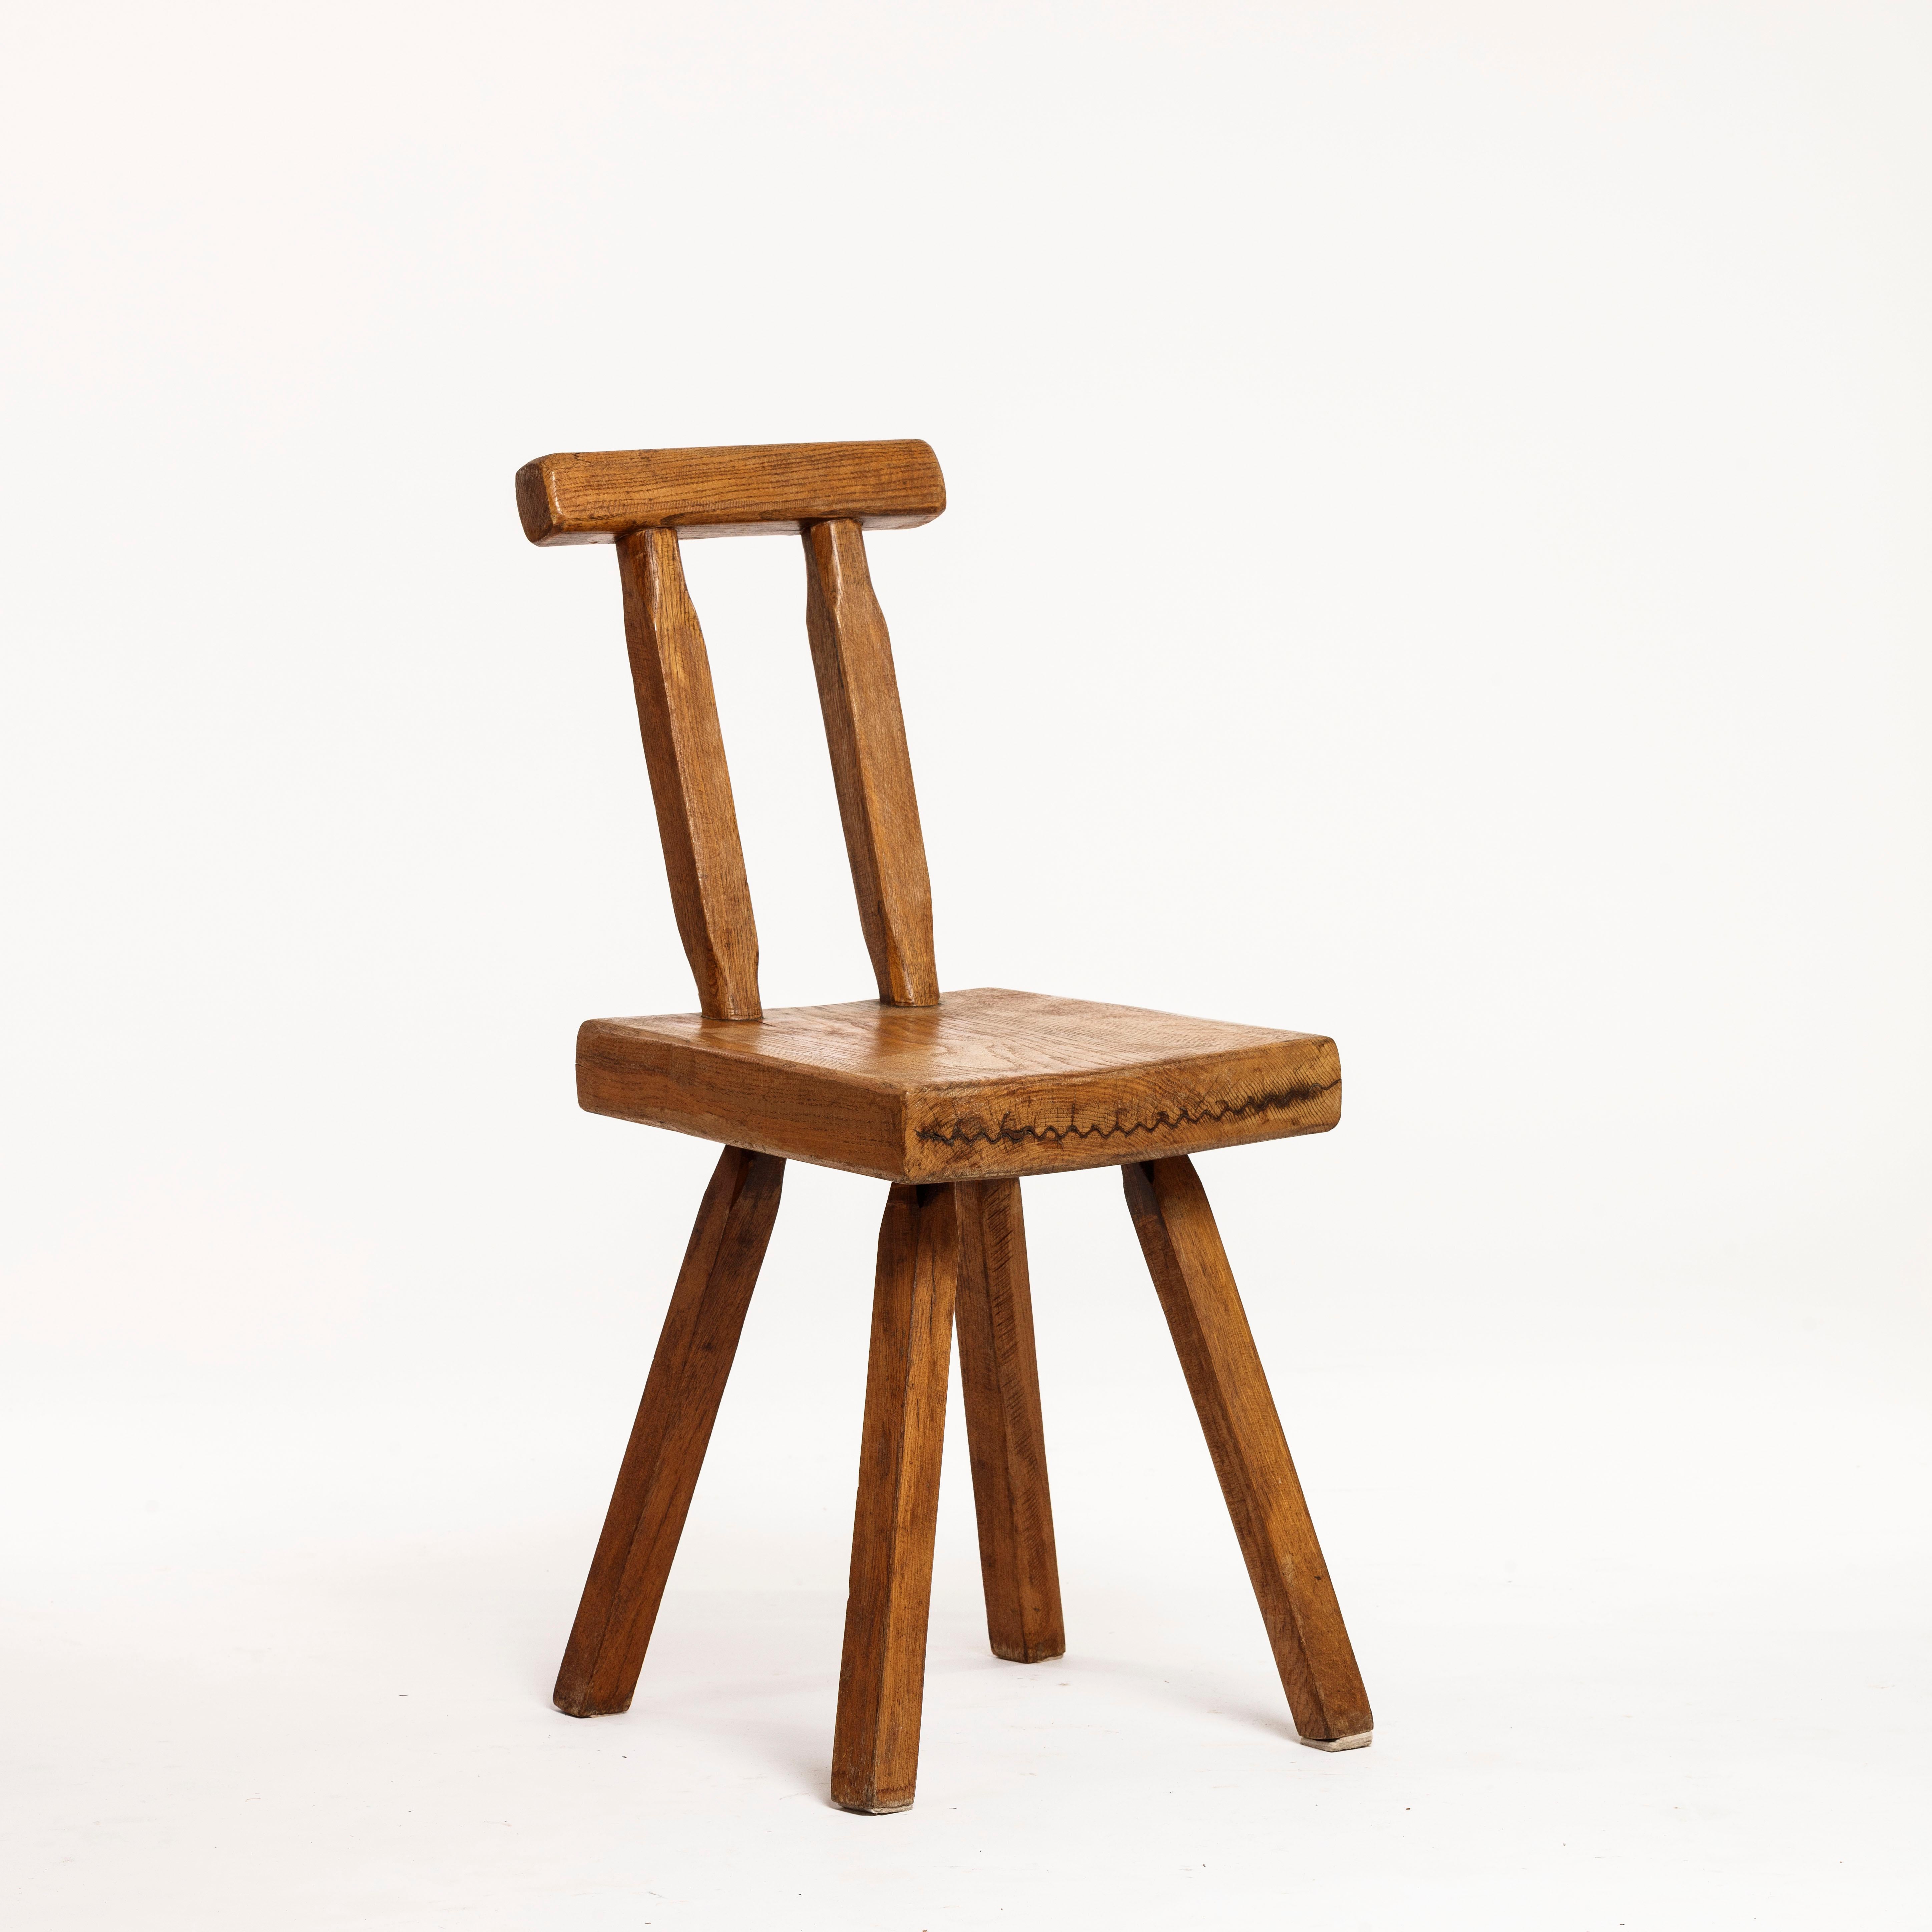 Mobichalet, founded by the teacher turned cabinetmaker Joseph Deffense in Beauraing, Belgium, in 1950, had been active a decade, aiming at furnishing second homes with rustic furnitures, which left a sought after legacy of strikingly powerful and